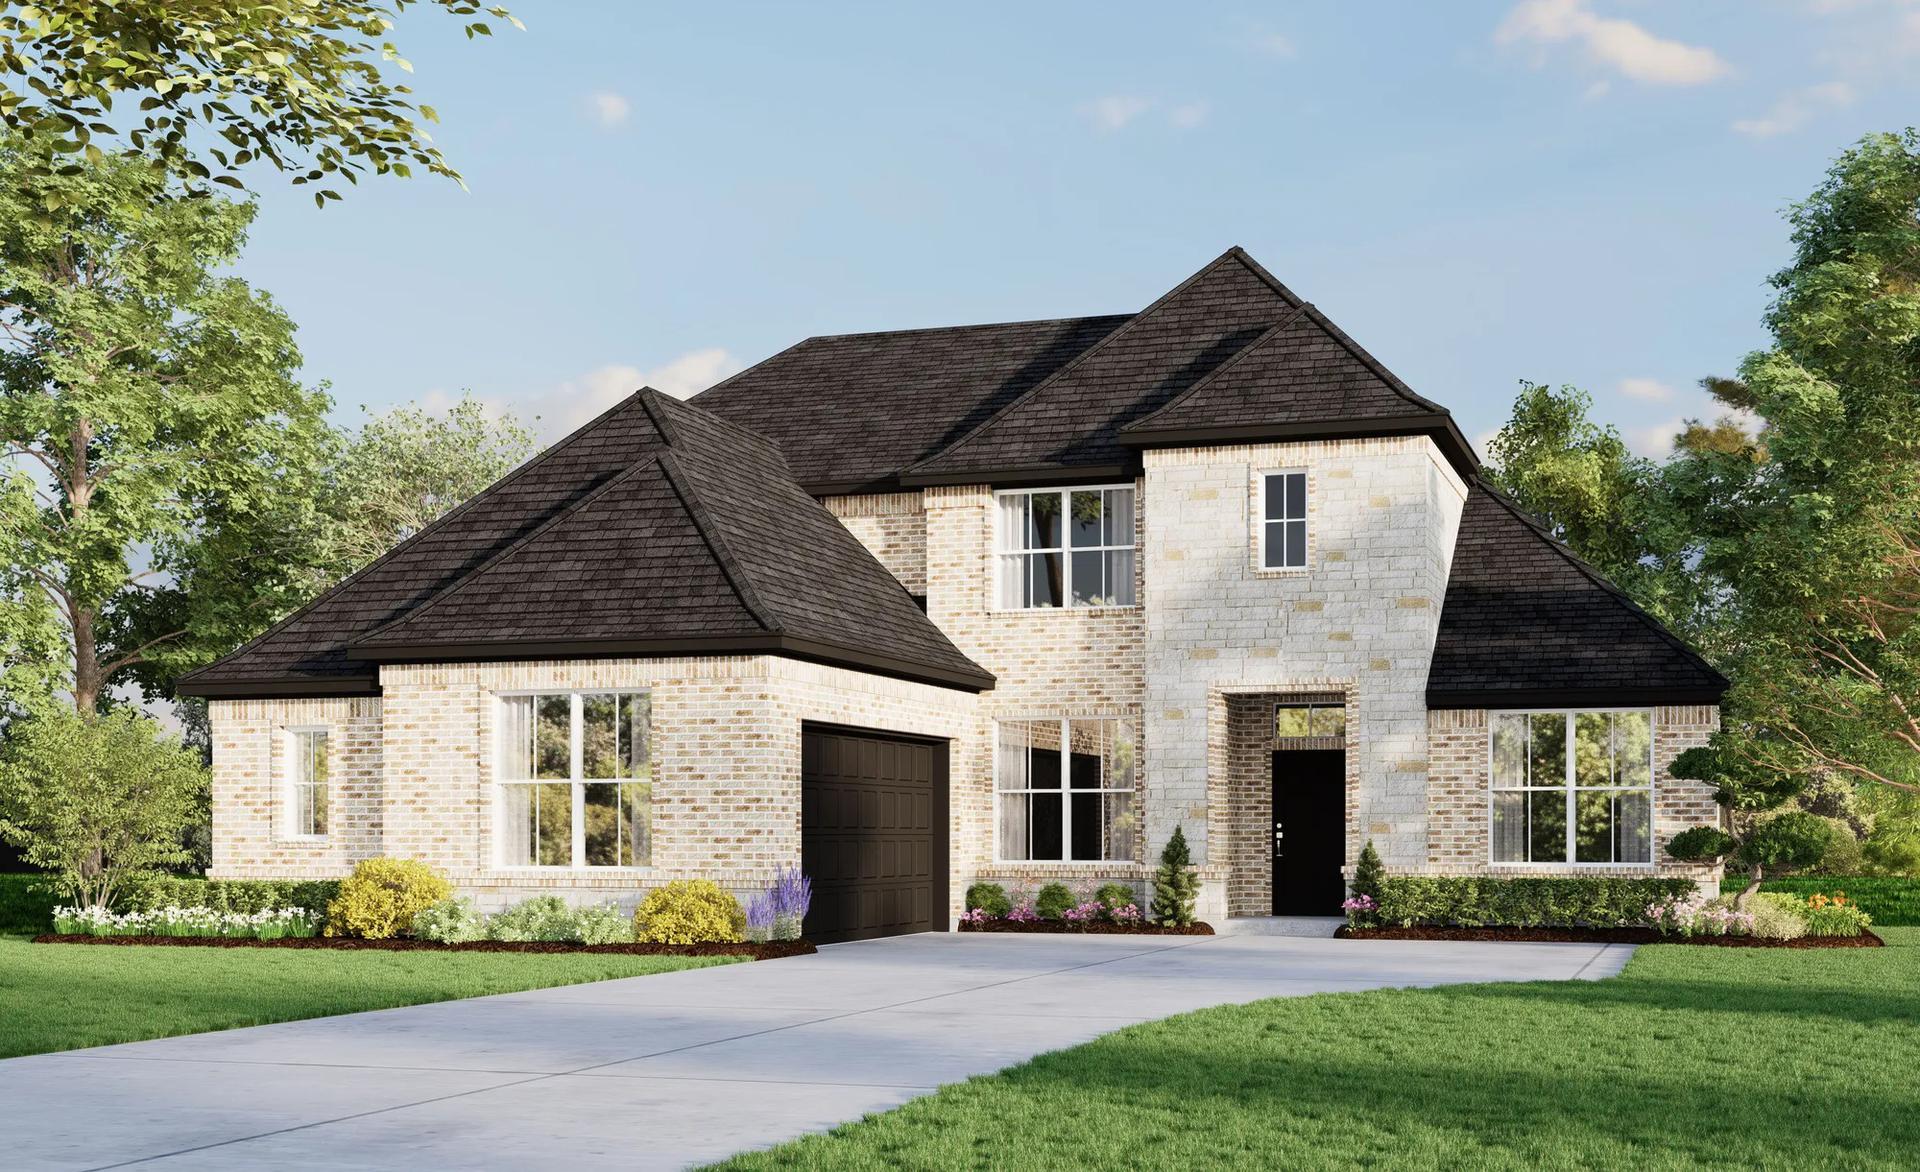 2972 B Stone. Concept 2972 Home with 4 Bedrooms